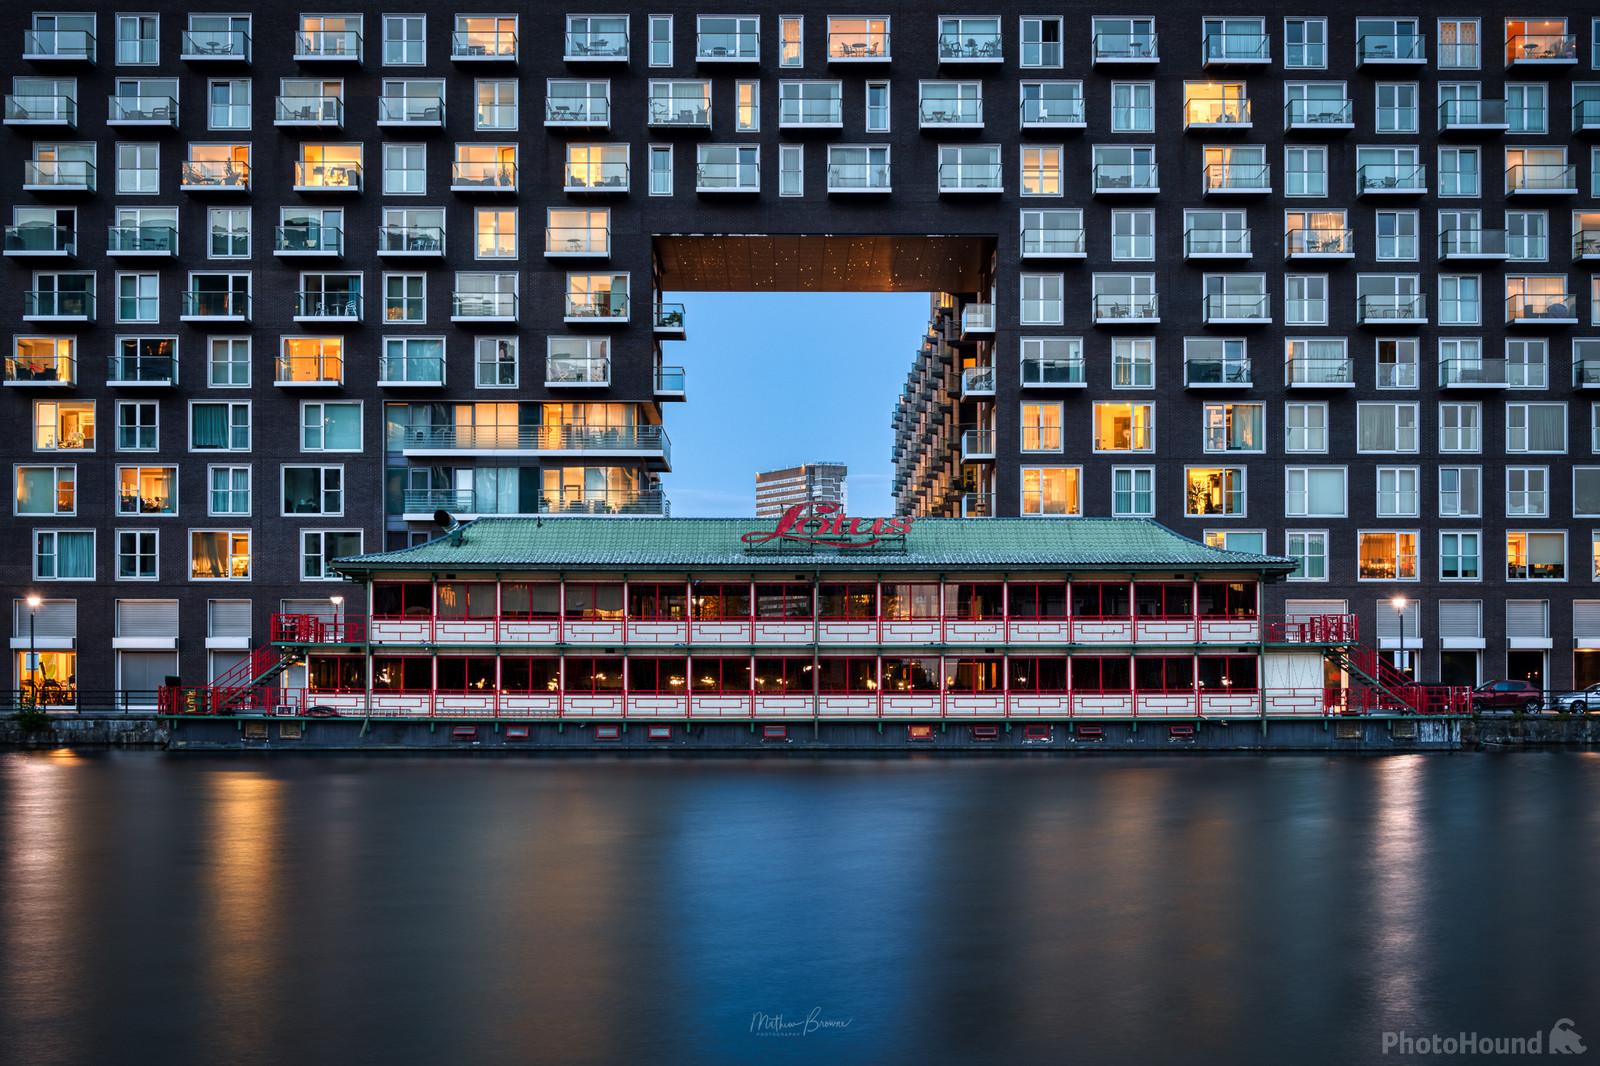 Image of Floating Chinese Restaurant by Mathew Browne